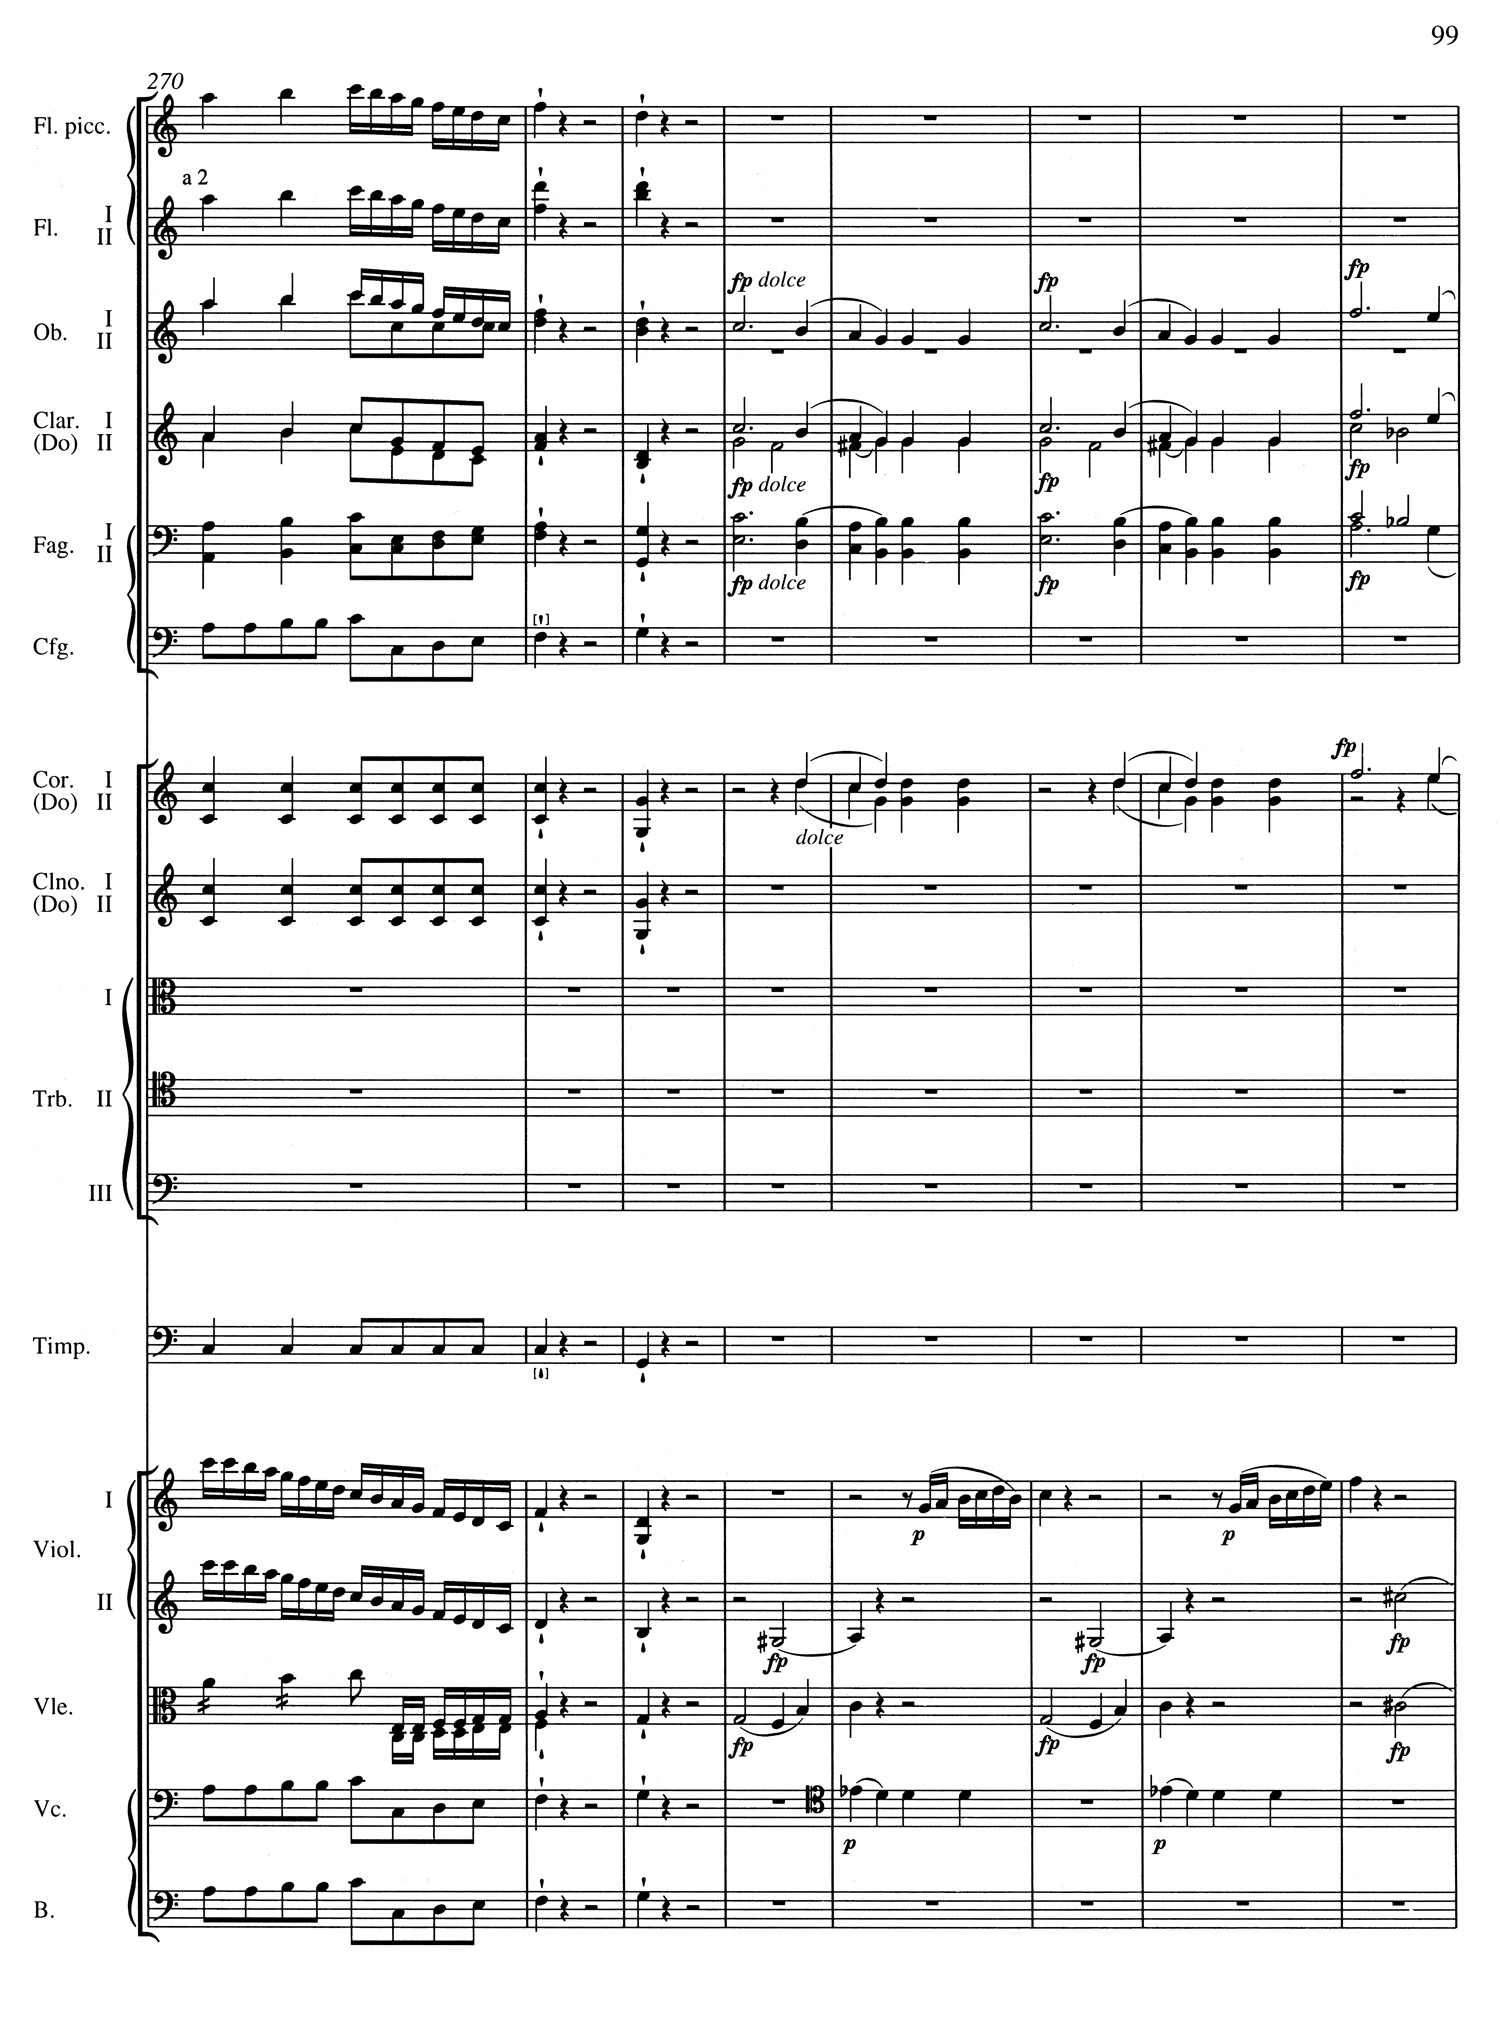 Beethoven 5 Score Page 11.jpg